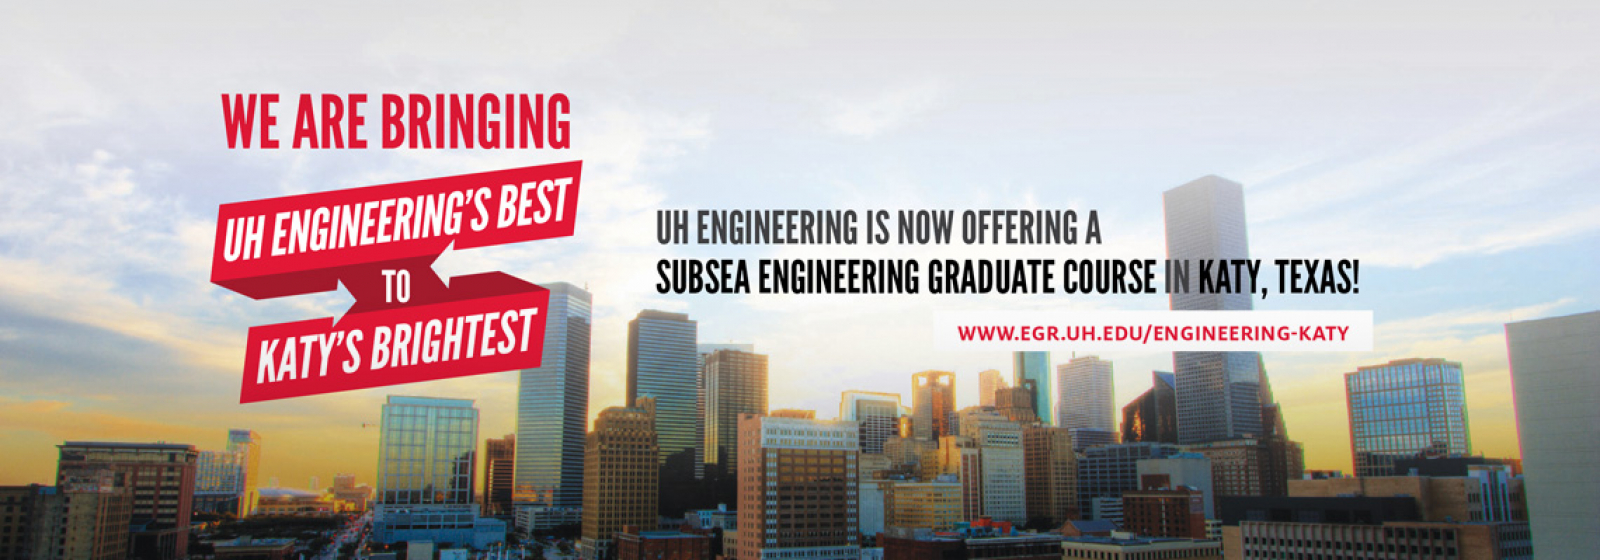 UH Engineering is now offering a subsea engineering graduate course in Katy, Texas!